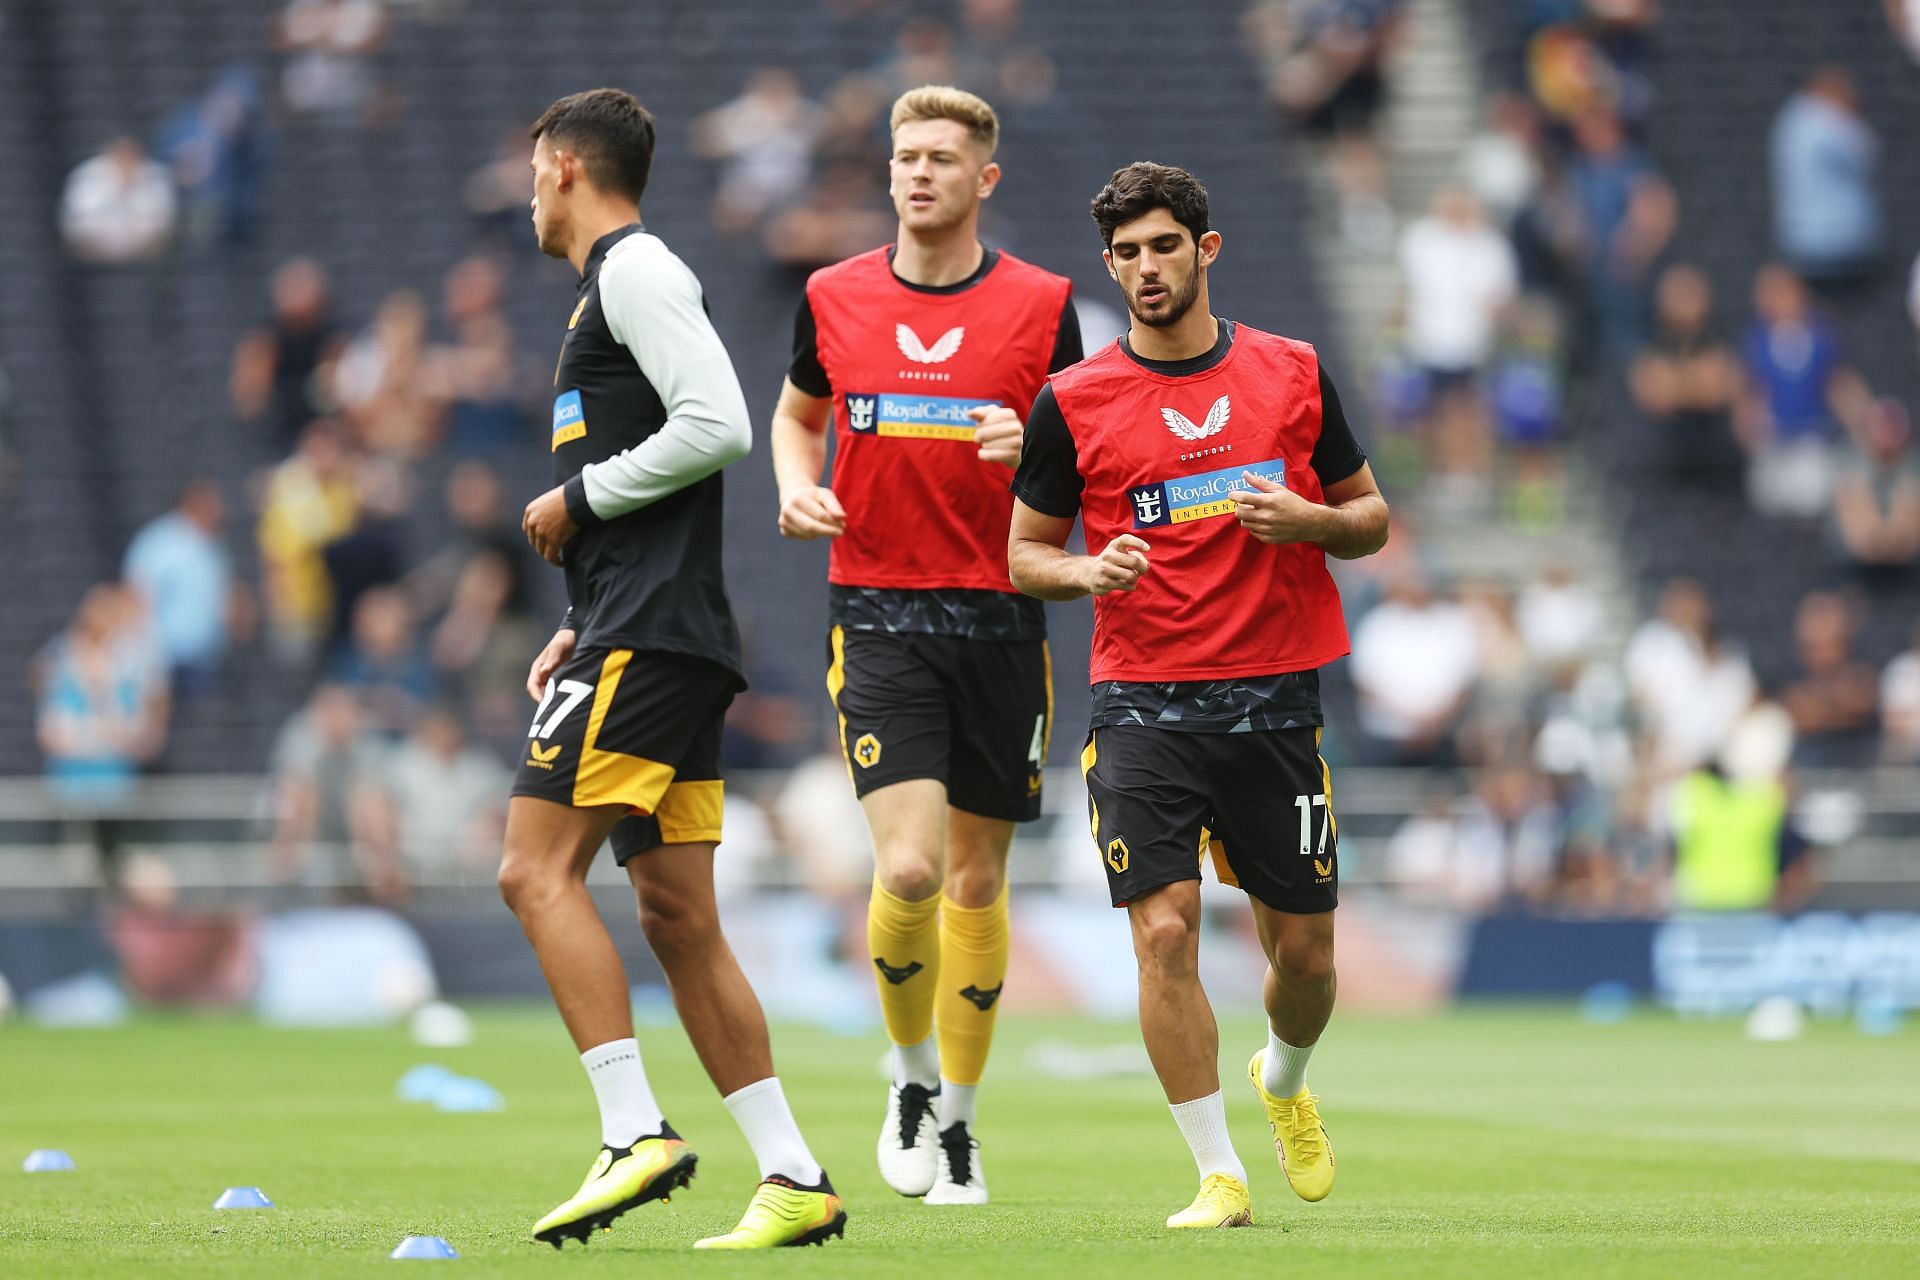 Matheus Nunes (L) and Goncalo Guedes (R) made their first starts for Wolves